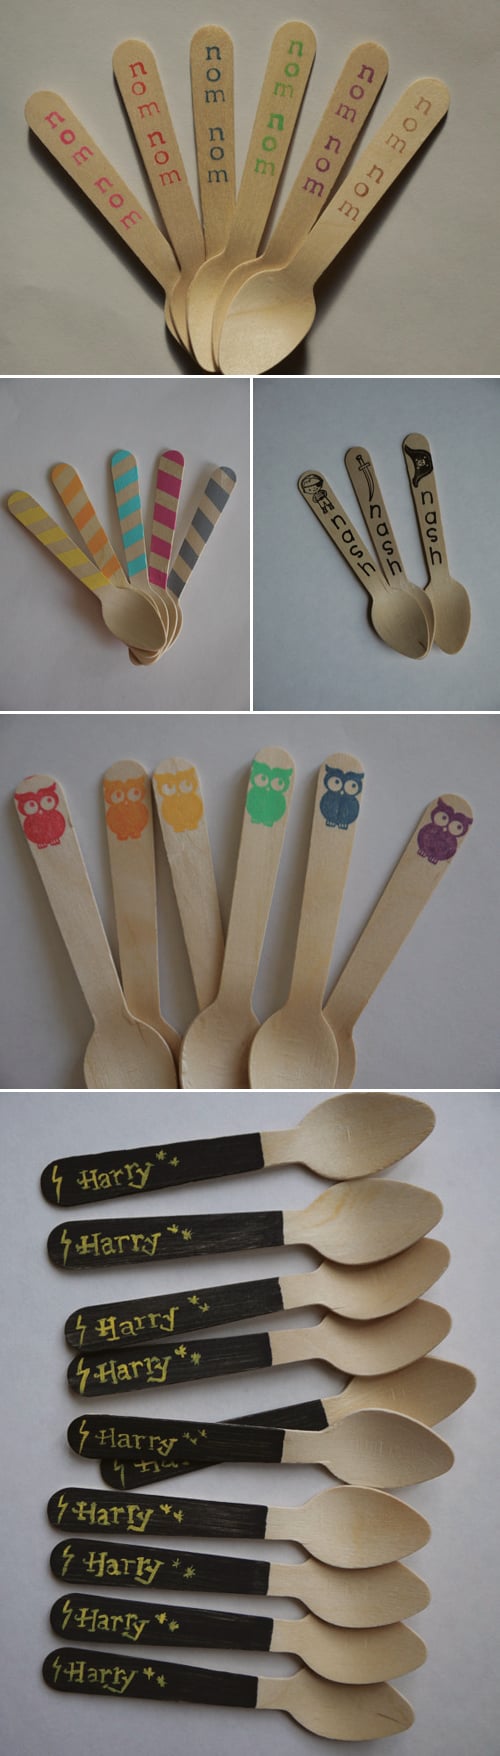 Personalized Wooden Ice Cream Spoons from Sucre and Spice, Etsy